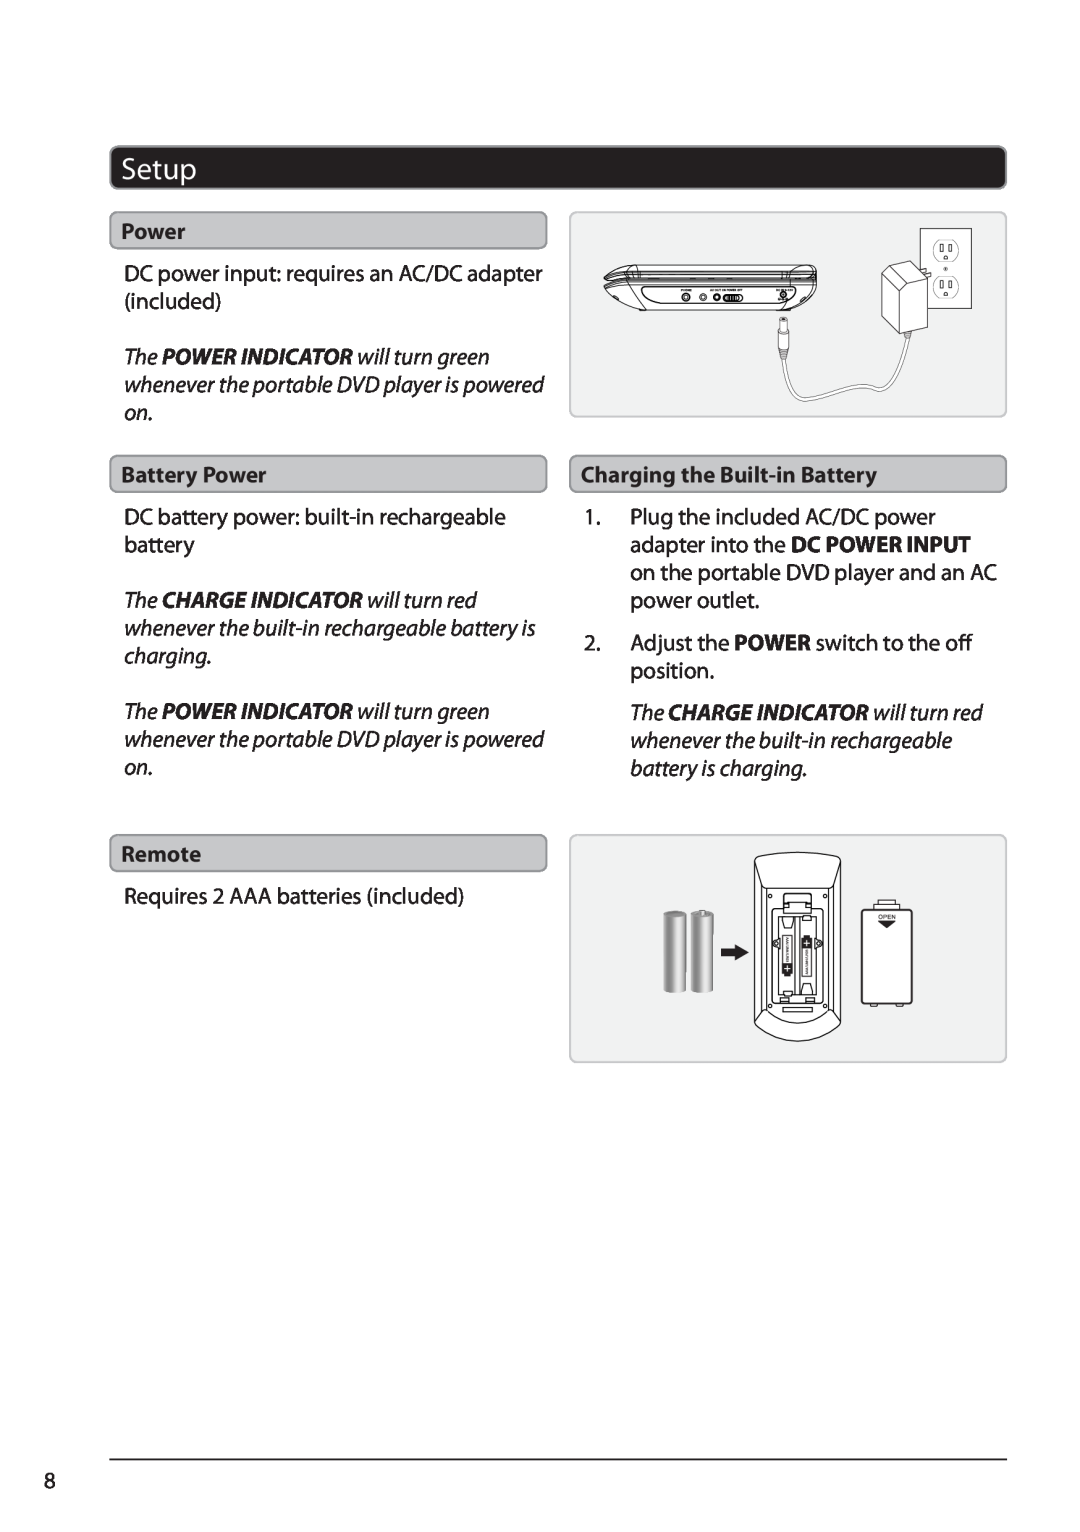 GPX PD701 manual Setup, Battery Power, Remote, Charging the Built-in Battery 